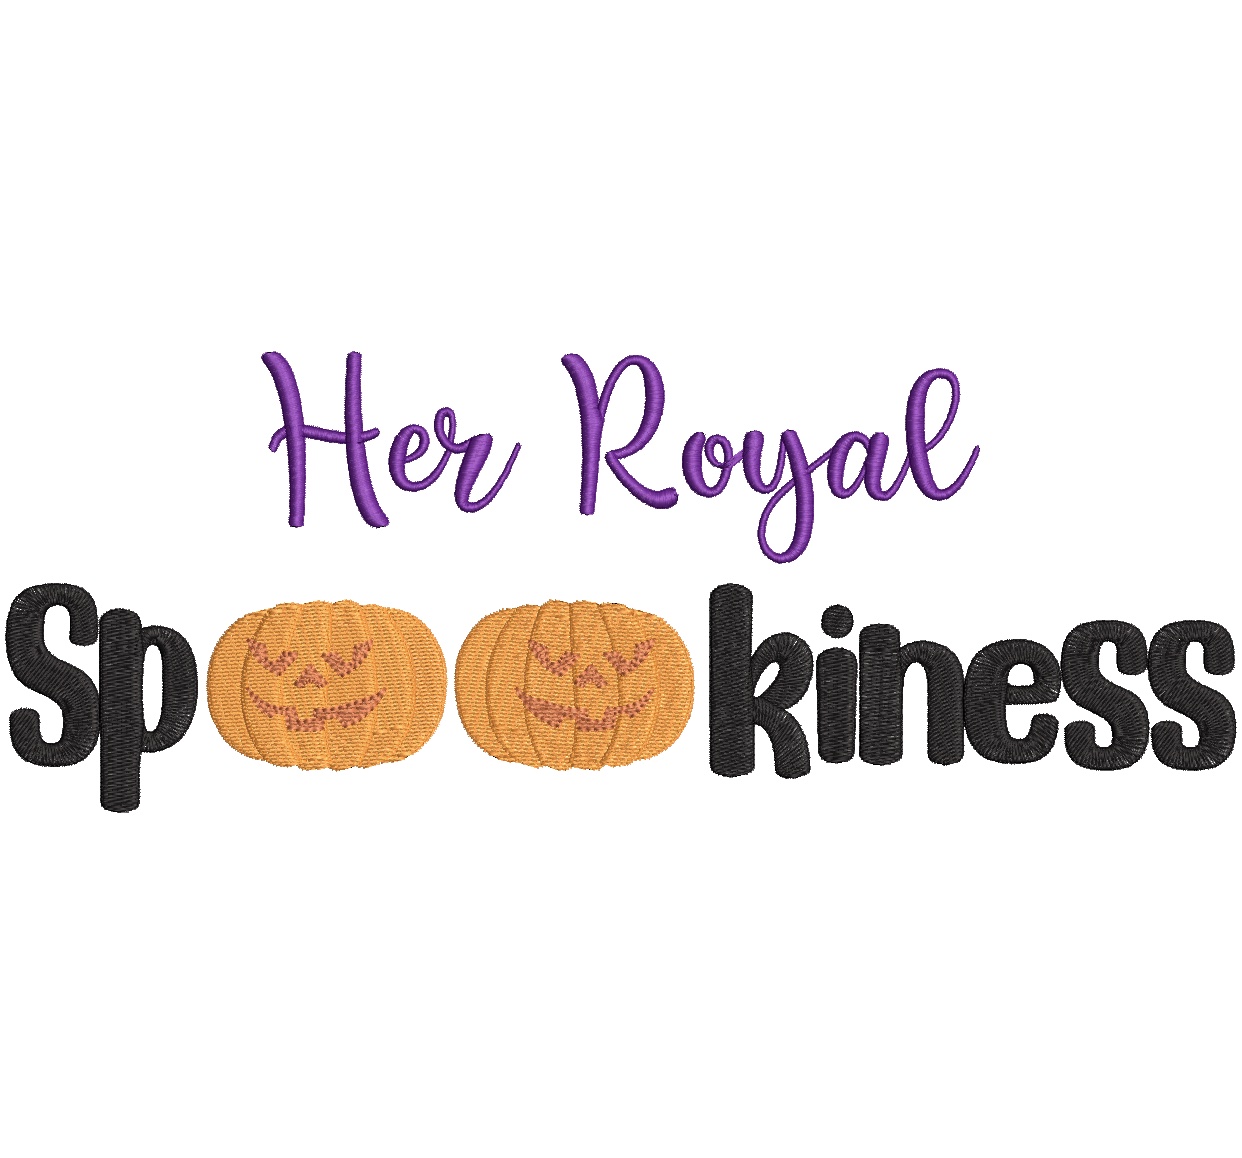 Her Royal Spookiness